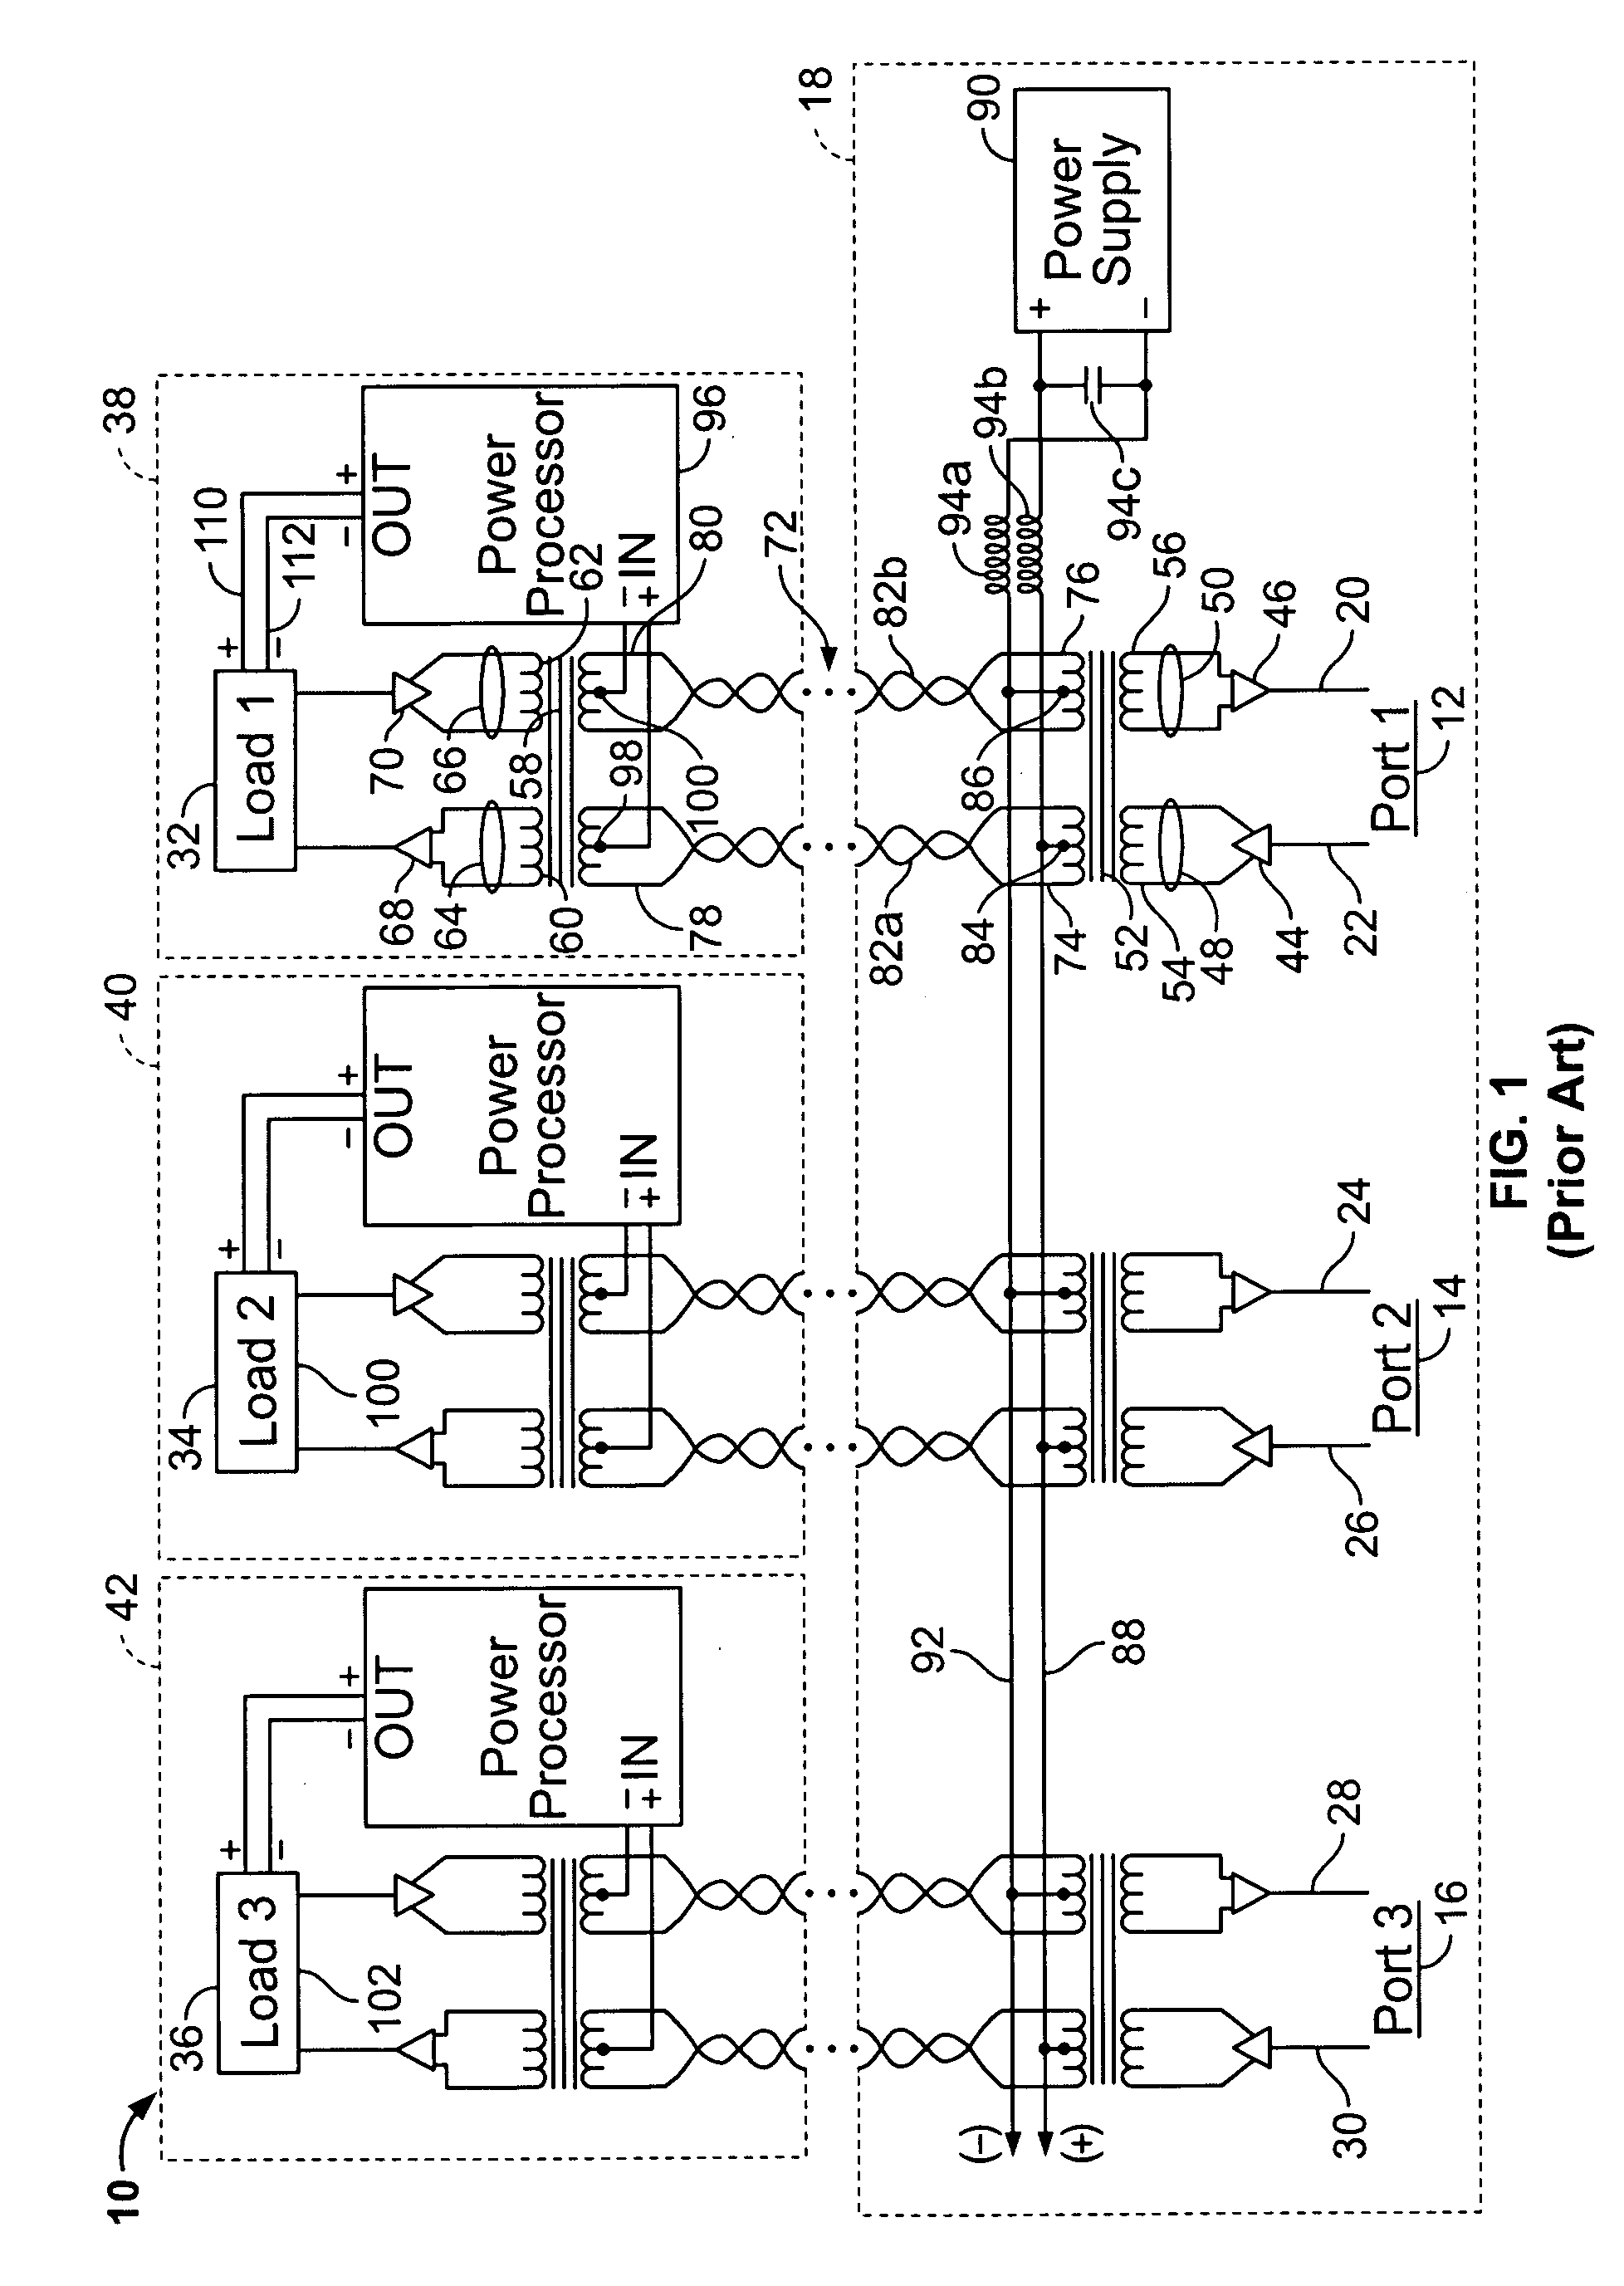 Method and apparatus for detecting a compatible phantom powered device using common mode signaling